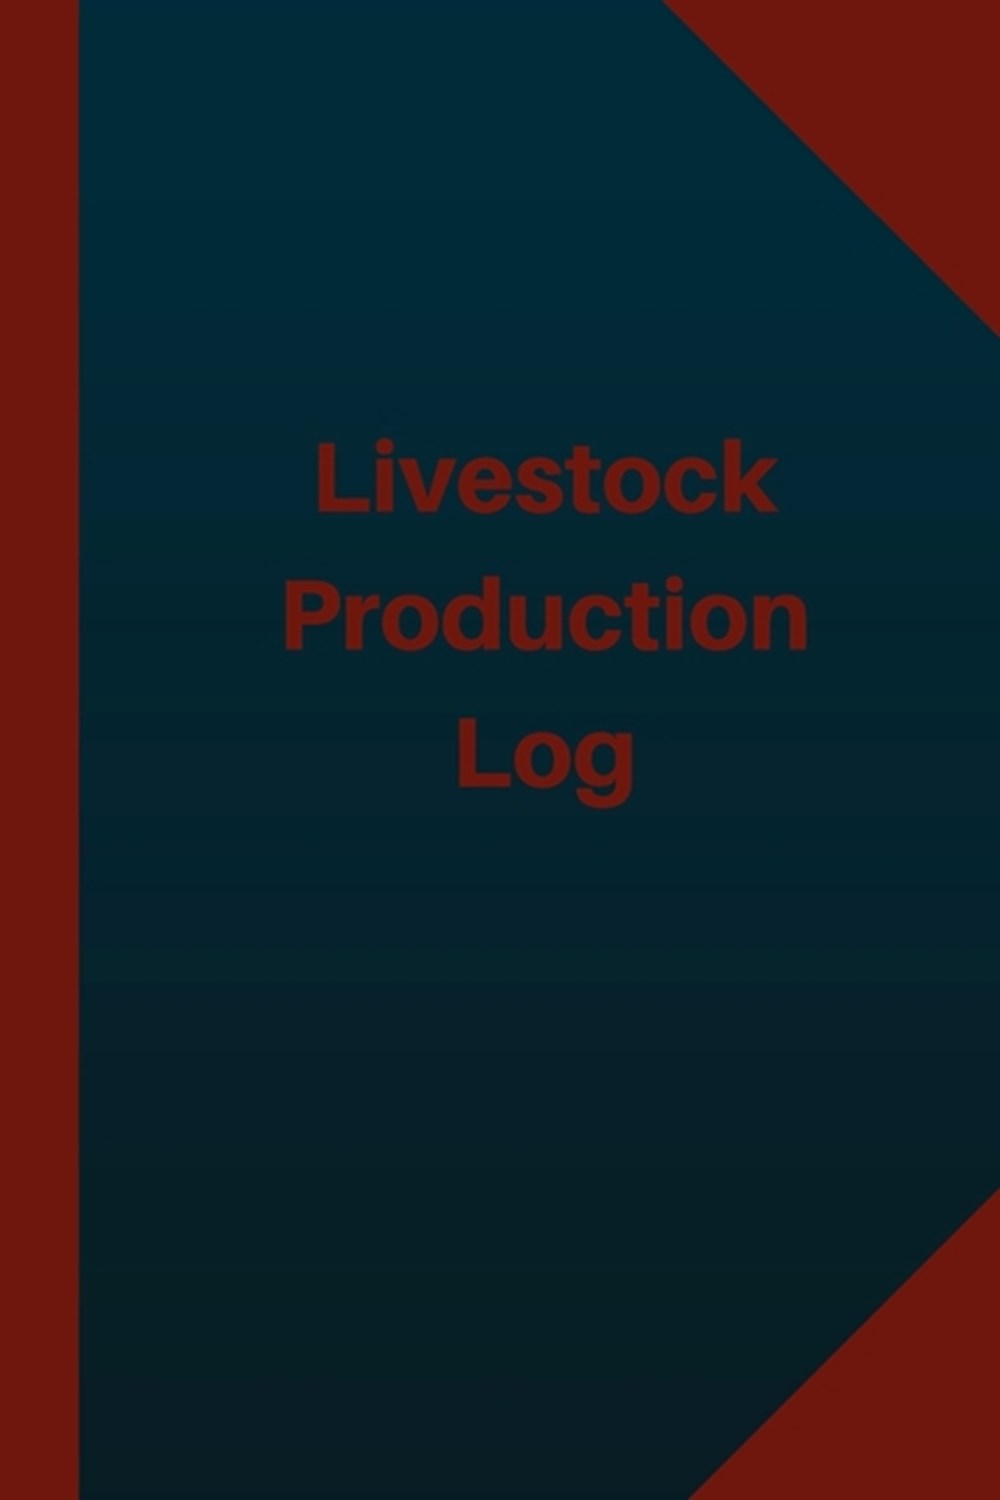 Livestock Production Log (Logbook, Journal - 124 pages 6x9 inches) Livestock Production Logbook (Blu